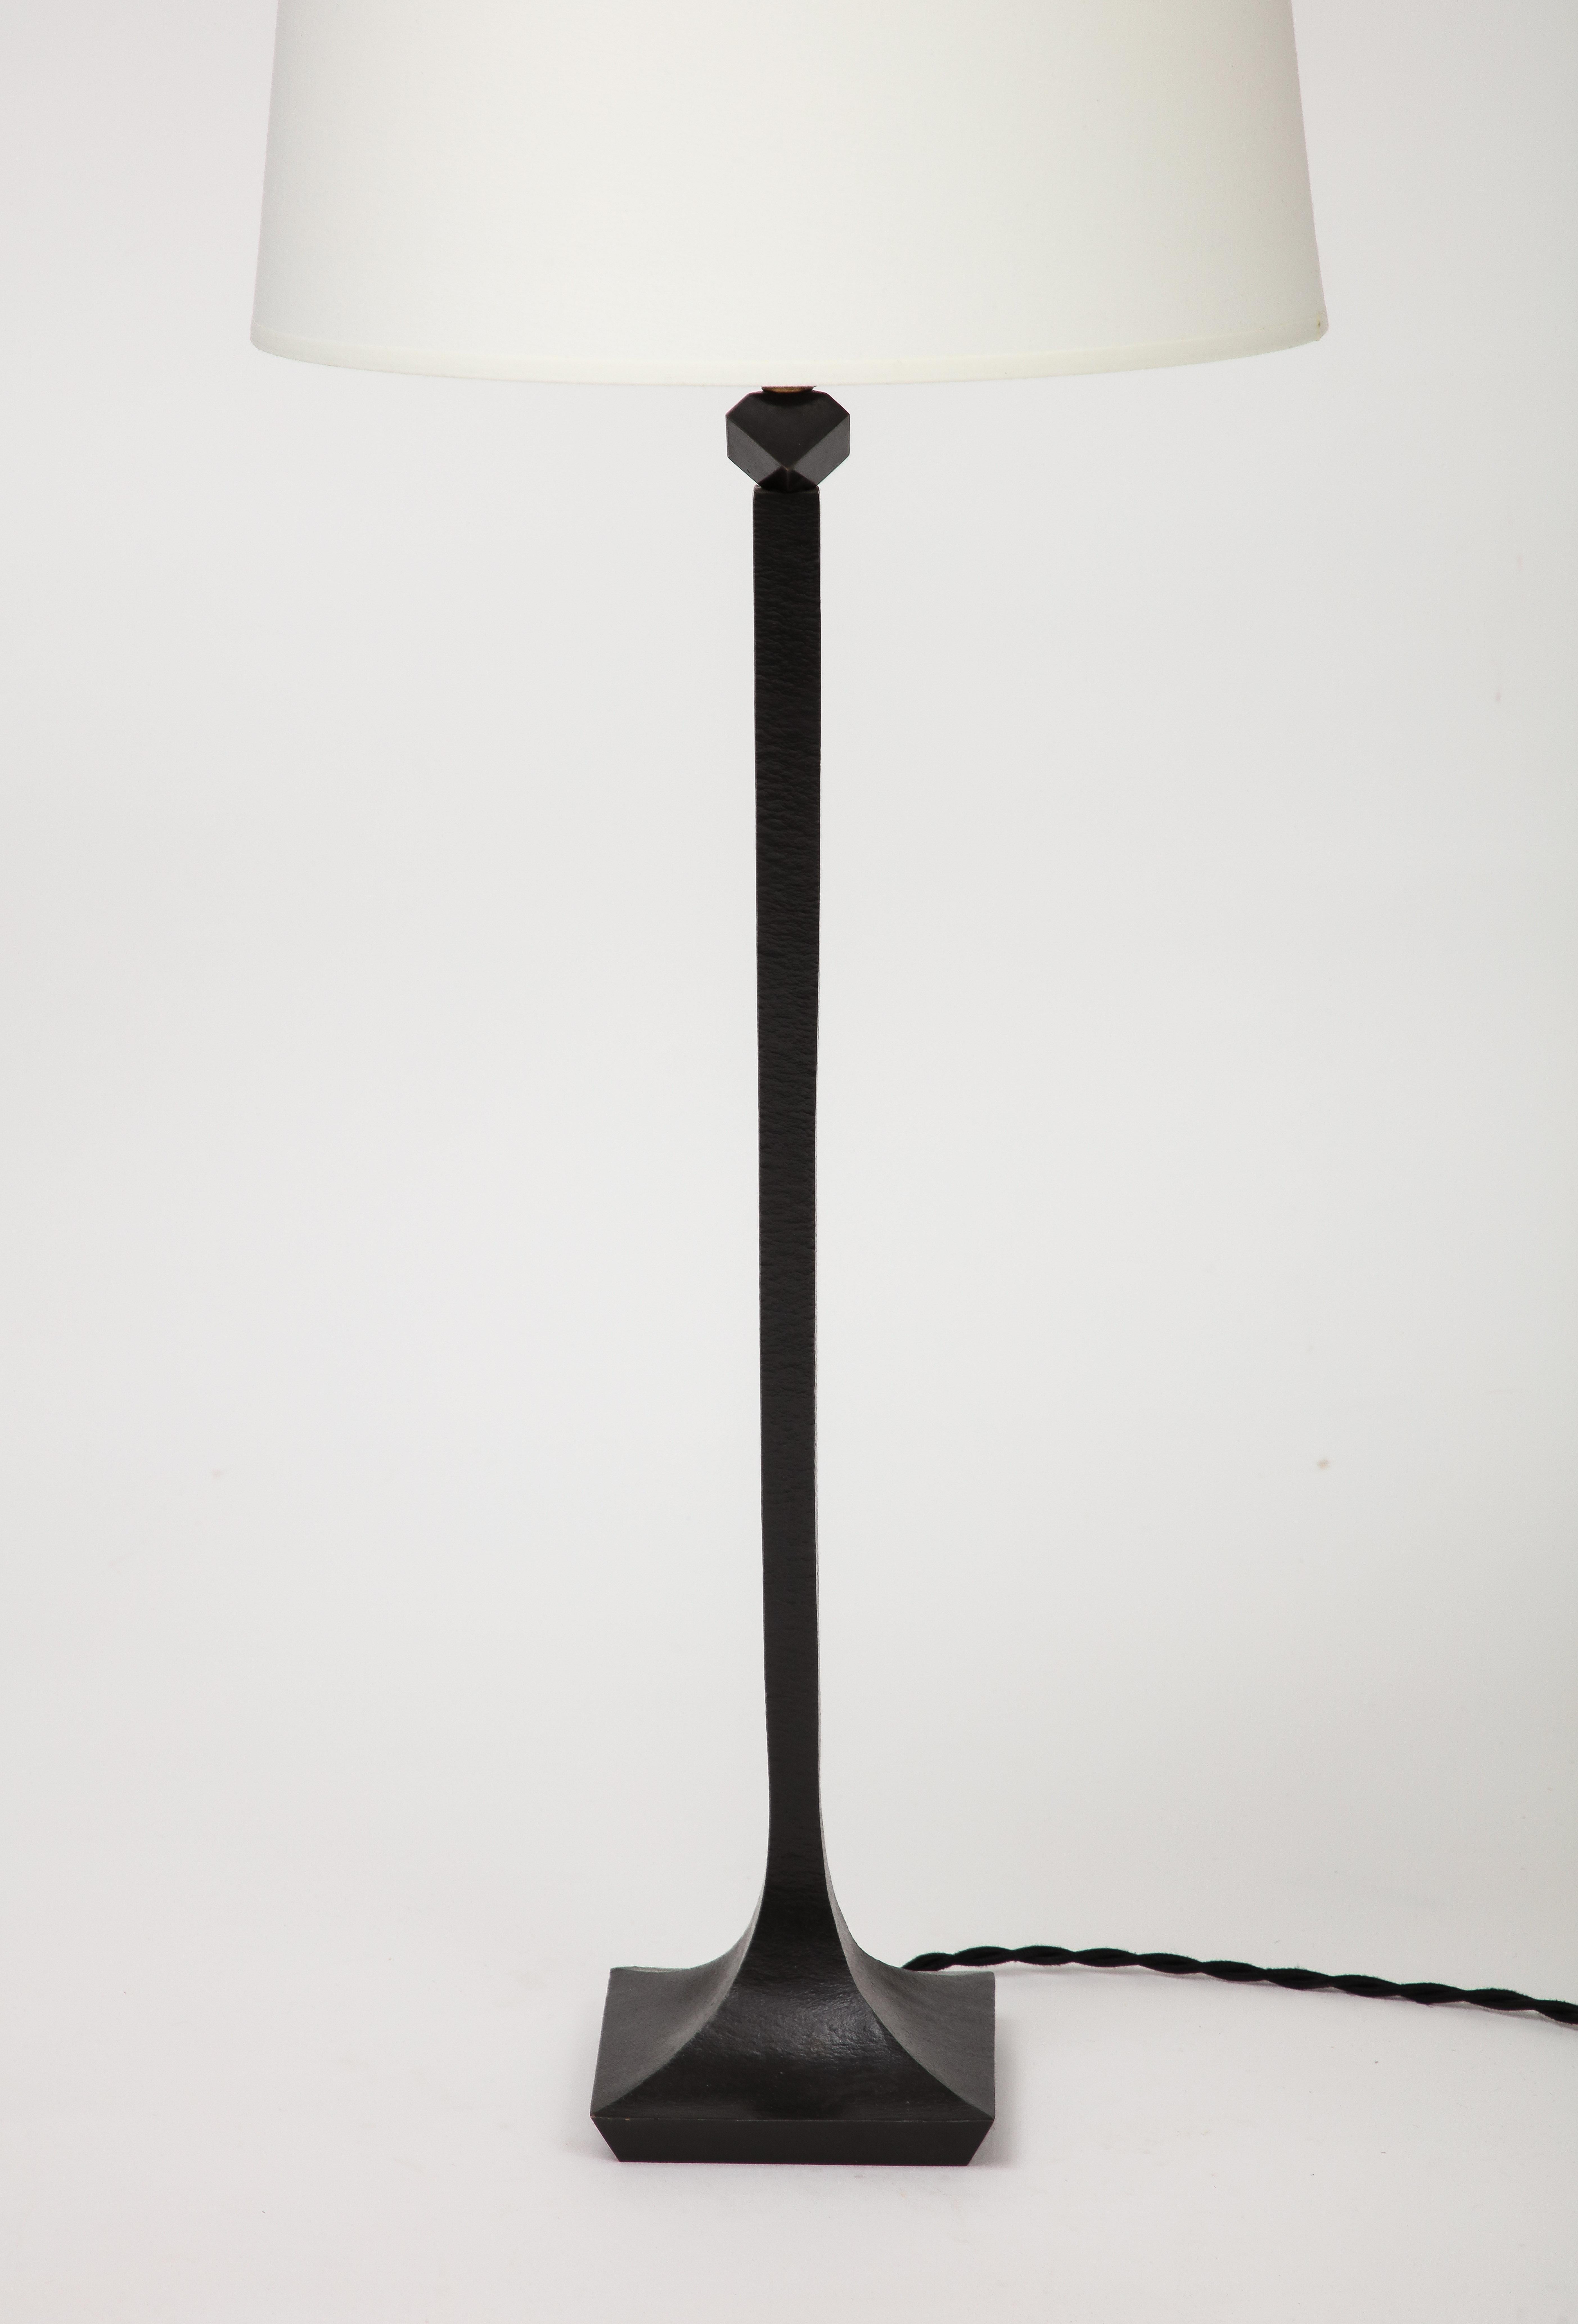 Signed Solid Bronze Table Lamp by R. Peduzzi, France, 1980's For Sale 1